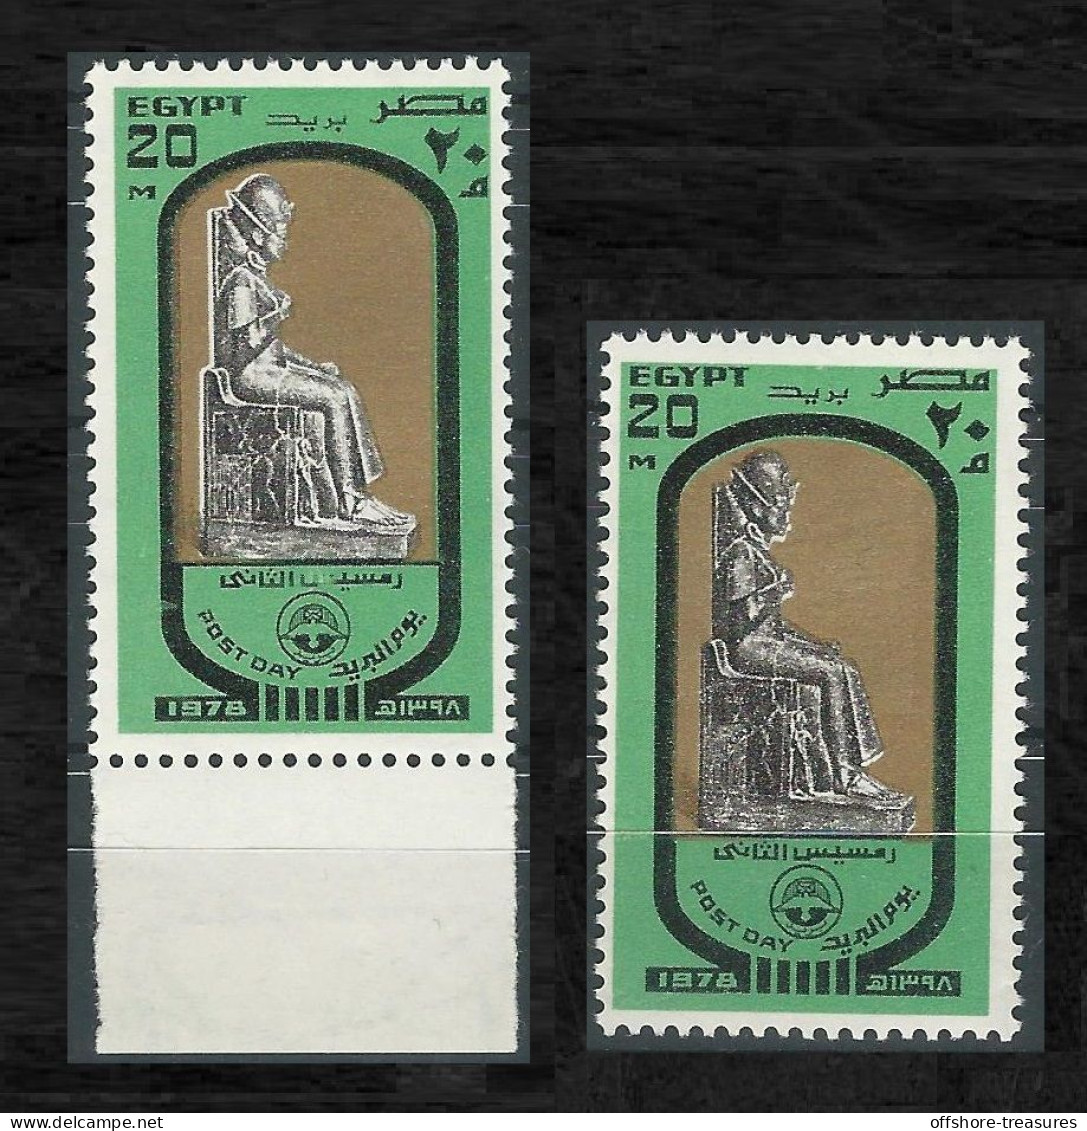 Egypt 1987 King Ramses Post Day 2 STAMP PRINT VARIETY / ERROR MNH STAMPS / SEE SCANS - Brieven En Documenten